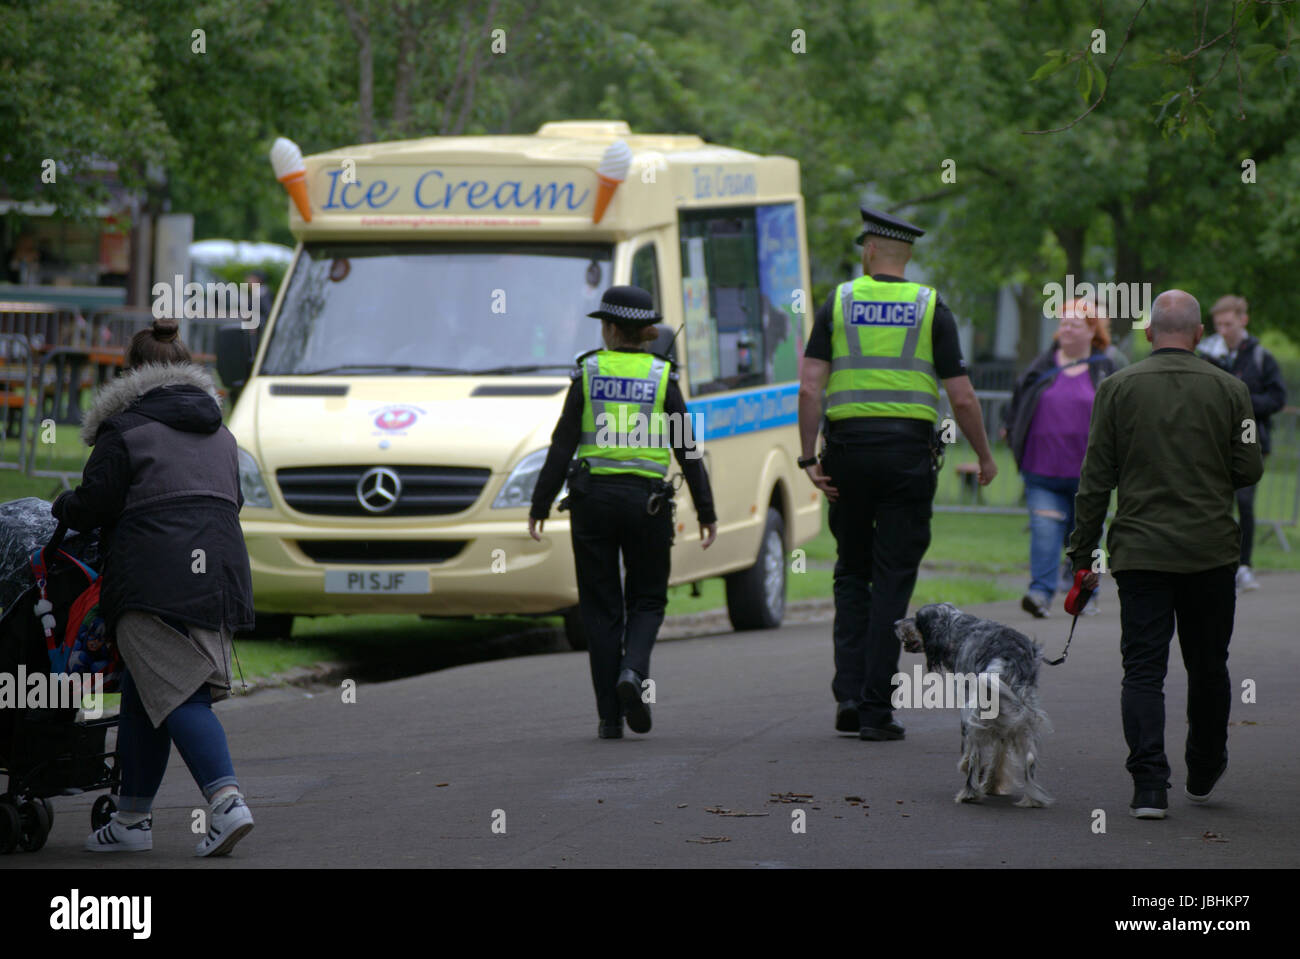 Glasgow, Scotland, UK. 11th June. The two elements of this years British summer were present as rain poured down on The West End Festival  Big Sunday in Kelvingrove Park. Visitors were heavily monitored by police and private security services. Armed police patrolled the park inside vehicles while bags were searched at entrances  by private security staff.  Police officers patrolled the venue on foot and bicycle.  Credit Gerard Ferry/Alamy Live News Stock Photo